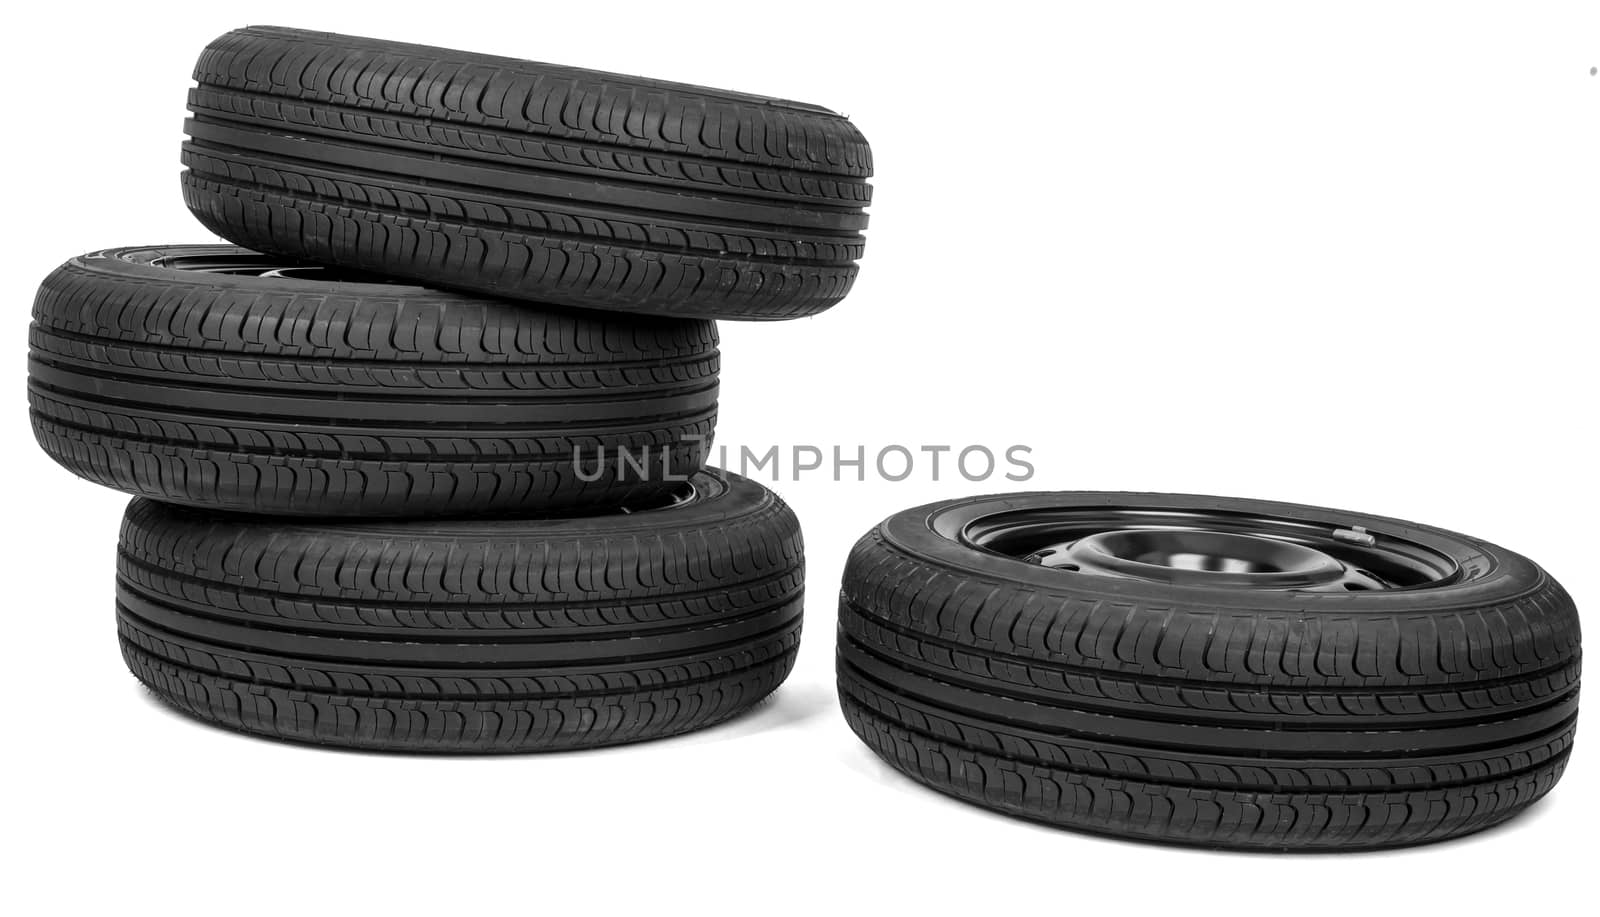 Automobile wheels with discs isolated on white background